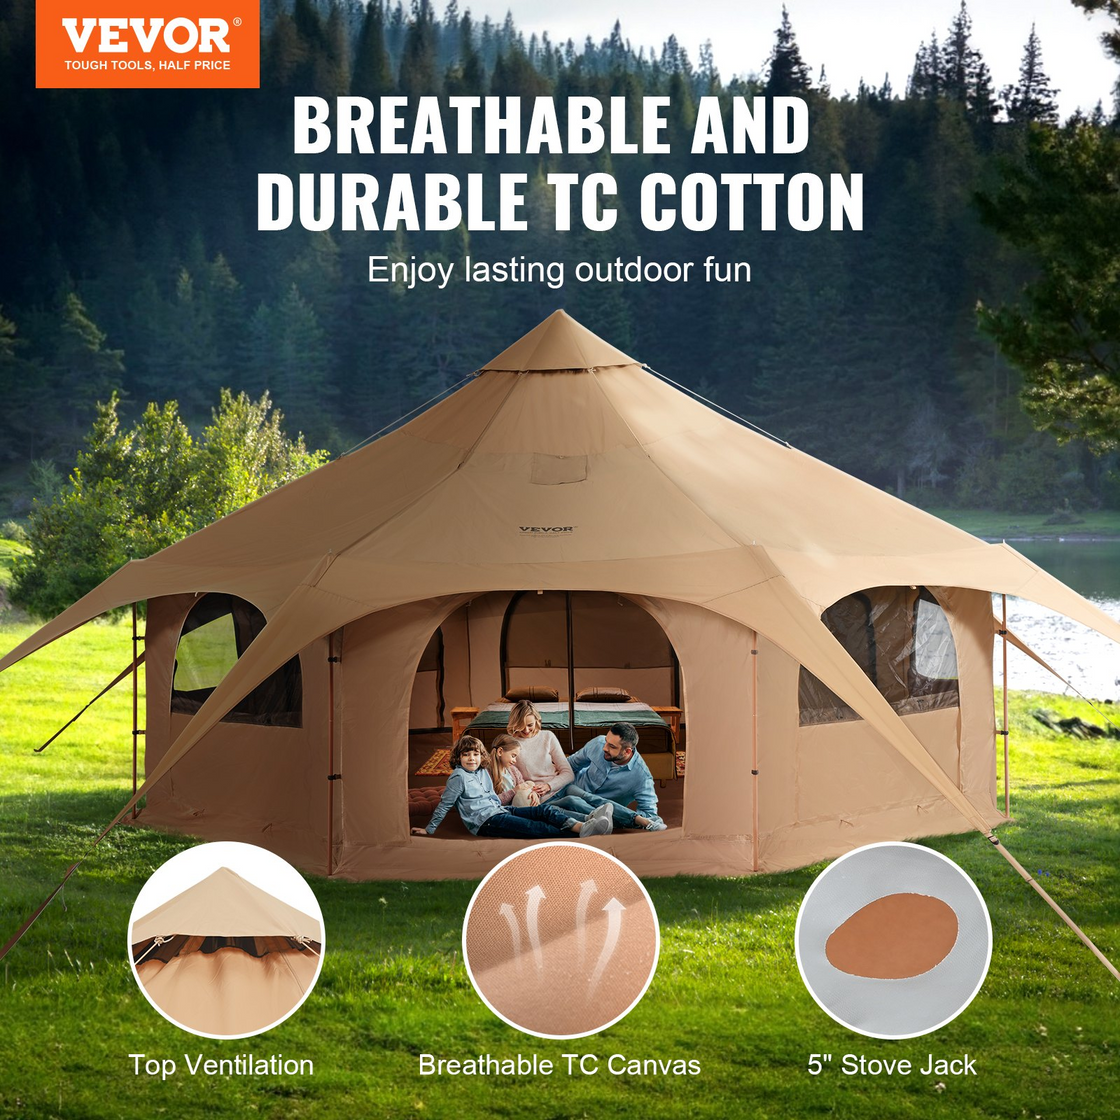 VEVOR Canvas Tent, 4 Seasons 5 m/16.4 ft Bell Tent, Canvas Tent for Camping with Stove Jack, Breathable Yurt Tent for up to 8 People, Family Camping Outdoor Hunting Party